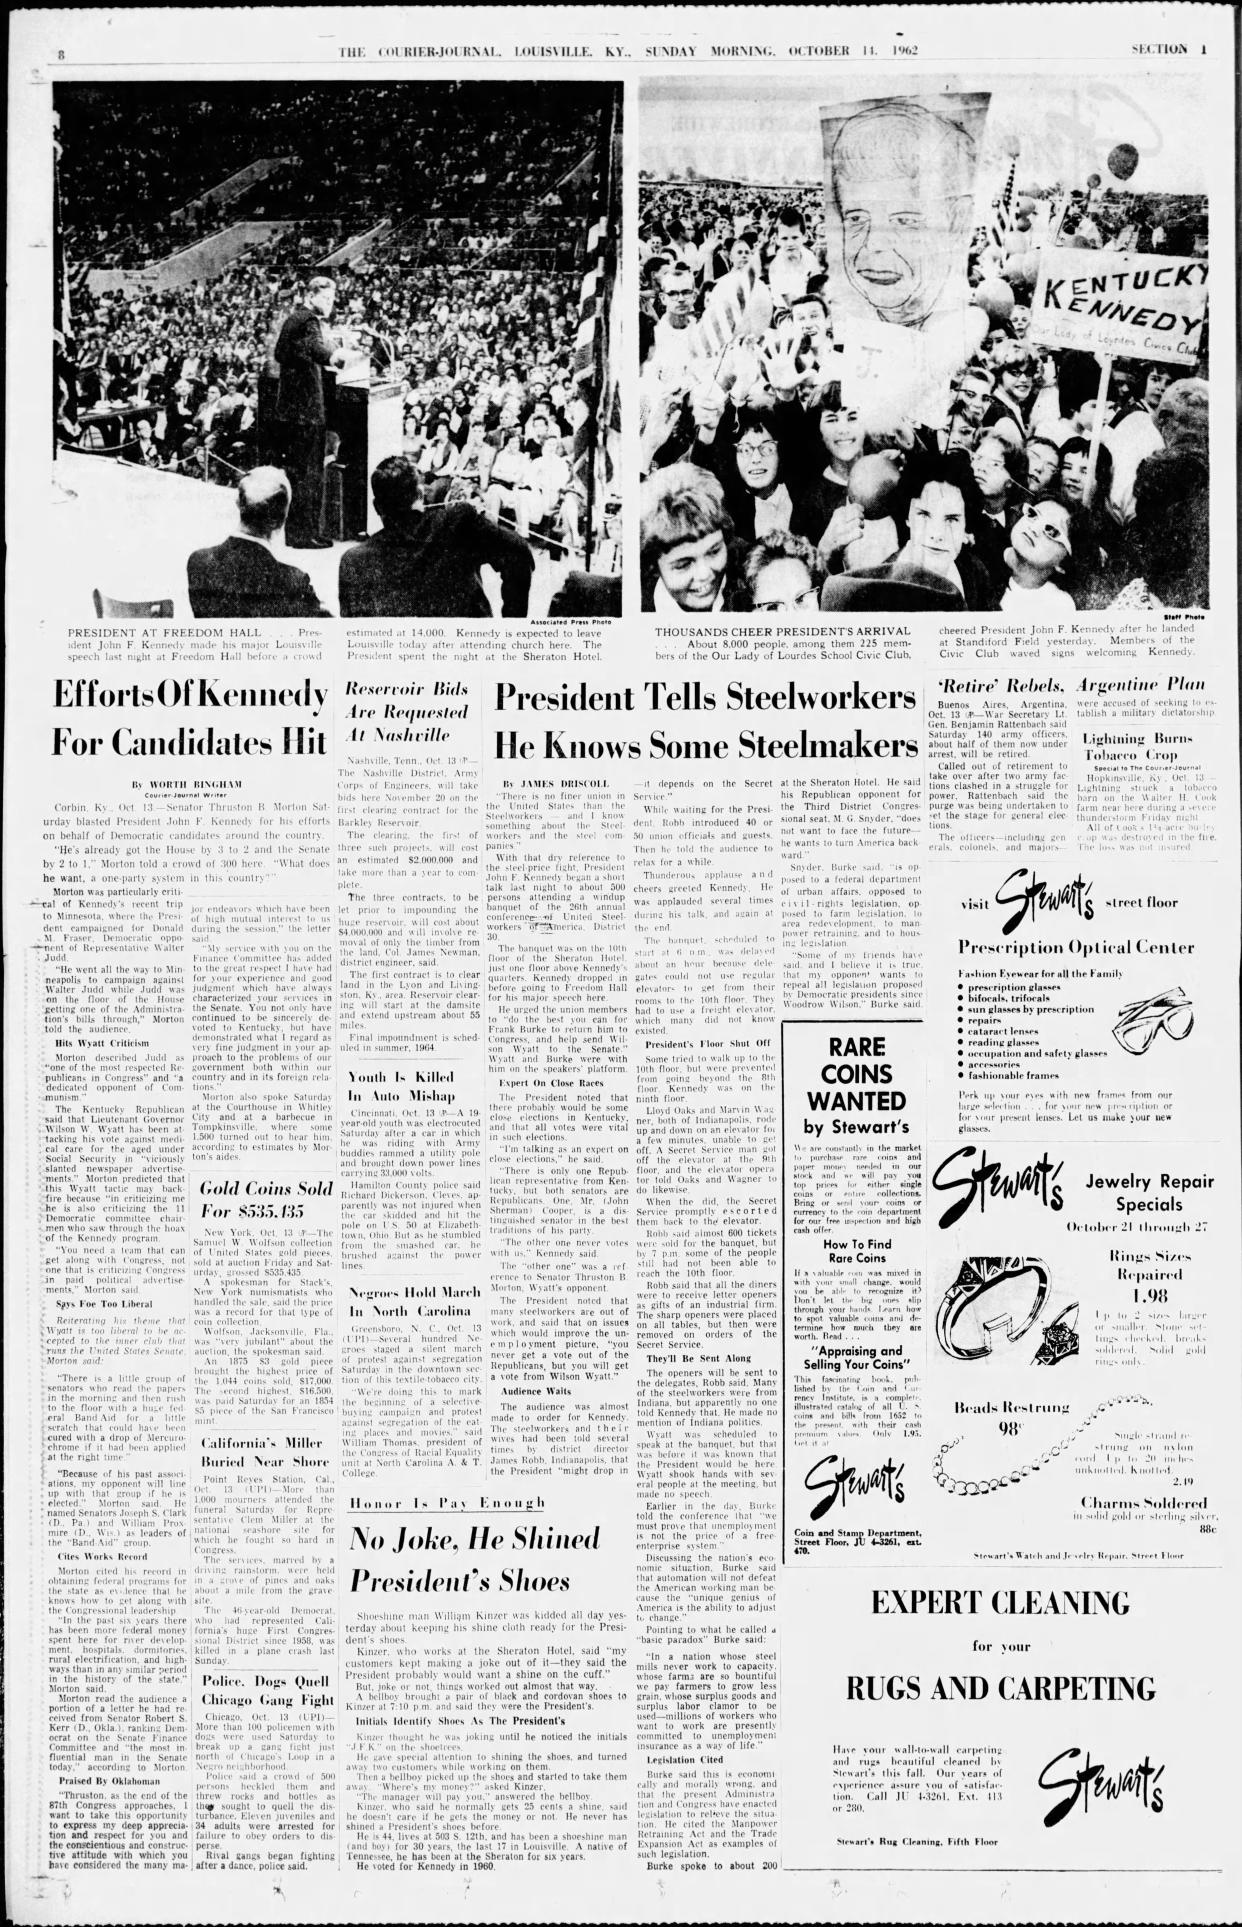 The Courier Journal on Sunday, Oct. 14, 1962, chronicled the arrival of President John F. Kennedy in Louisville.